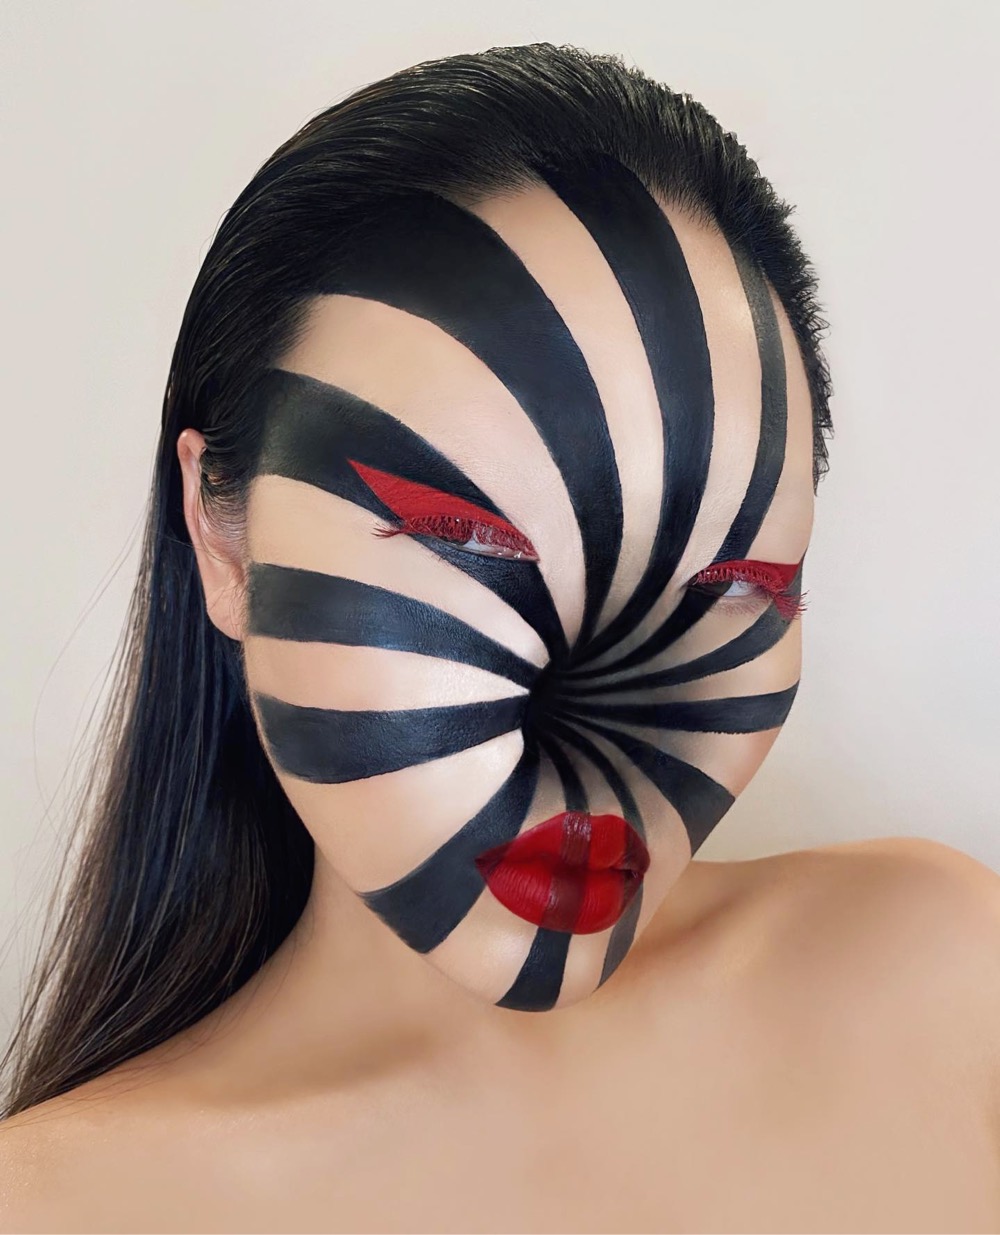 elaborate face makeup that makes it look like there's a hole in the middle of a woman's face